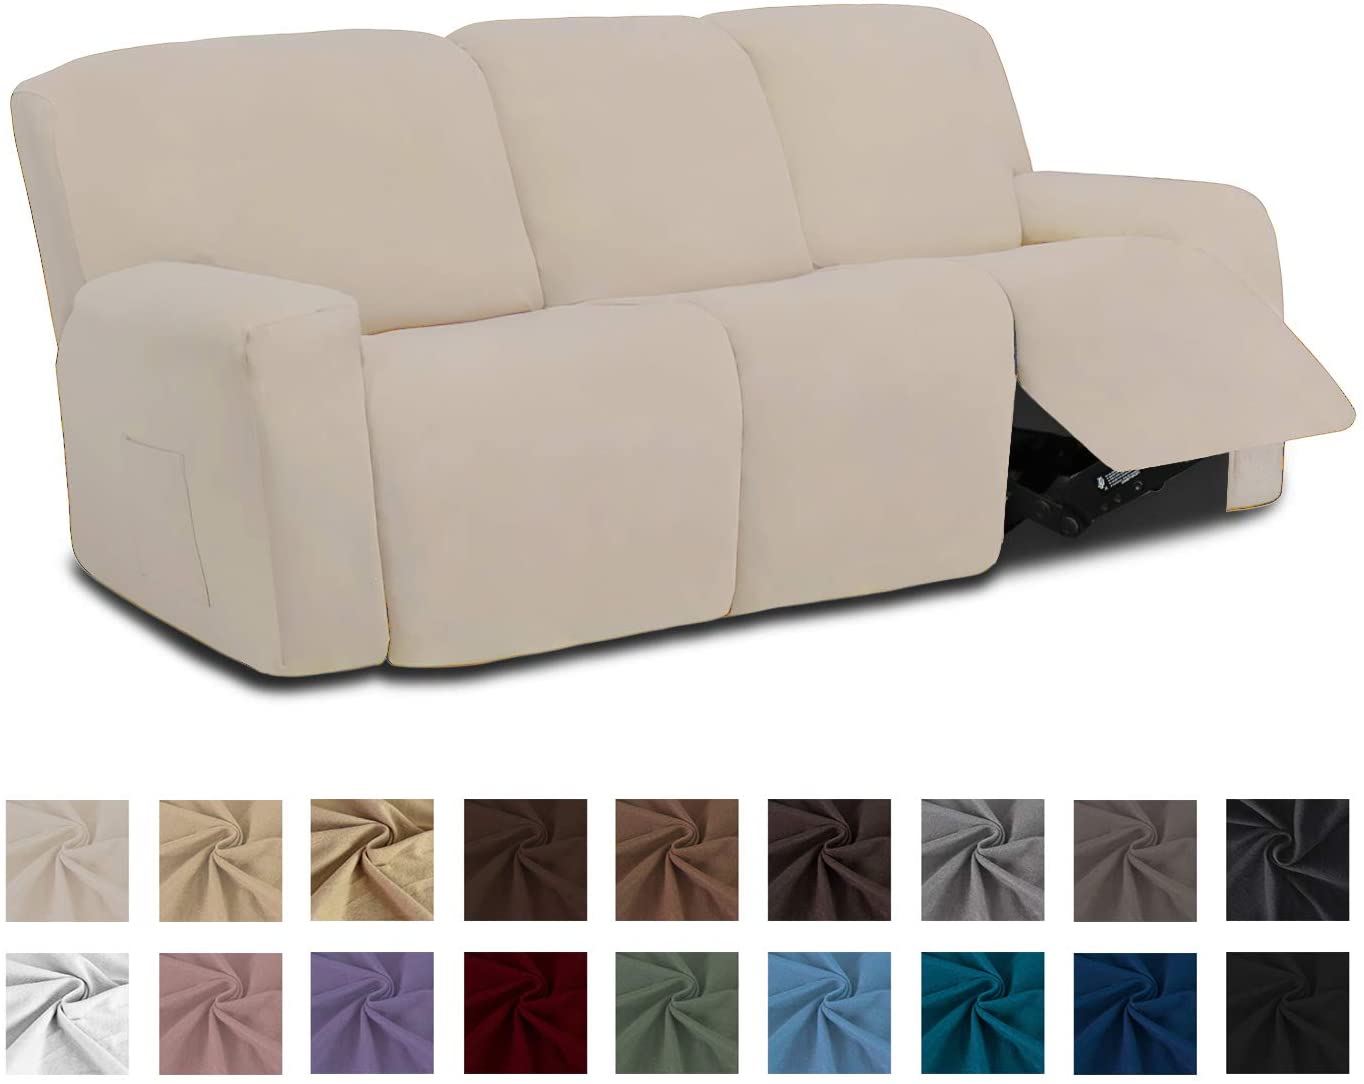 Easy-Going 8 Pieces Microfiber Stretch Sectional Recliner Sofa Slipcover Soft 3 